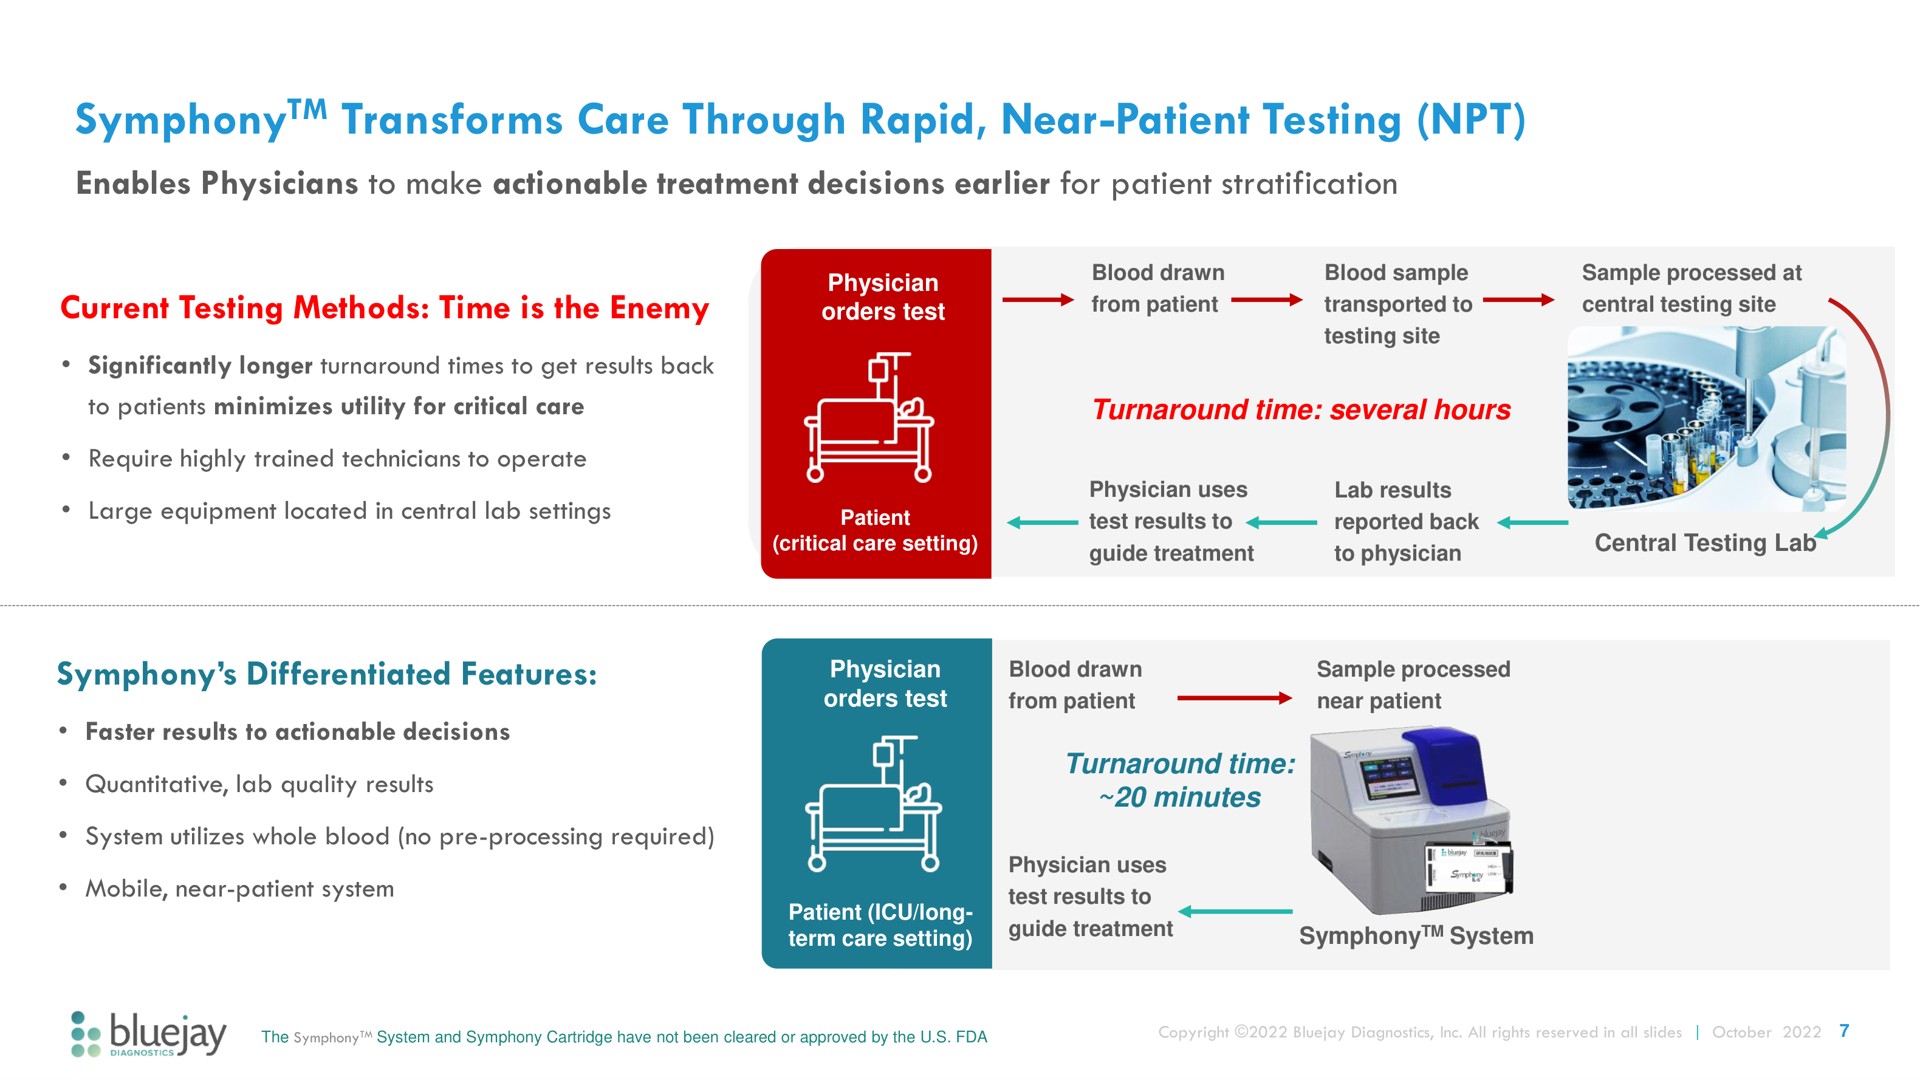 transforms care through rapid near patient testing symphony | Bluejay